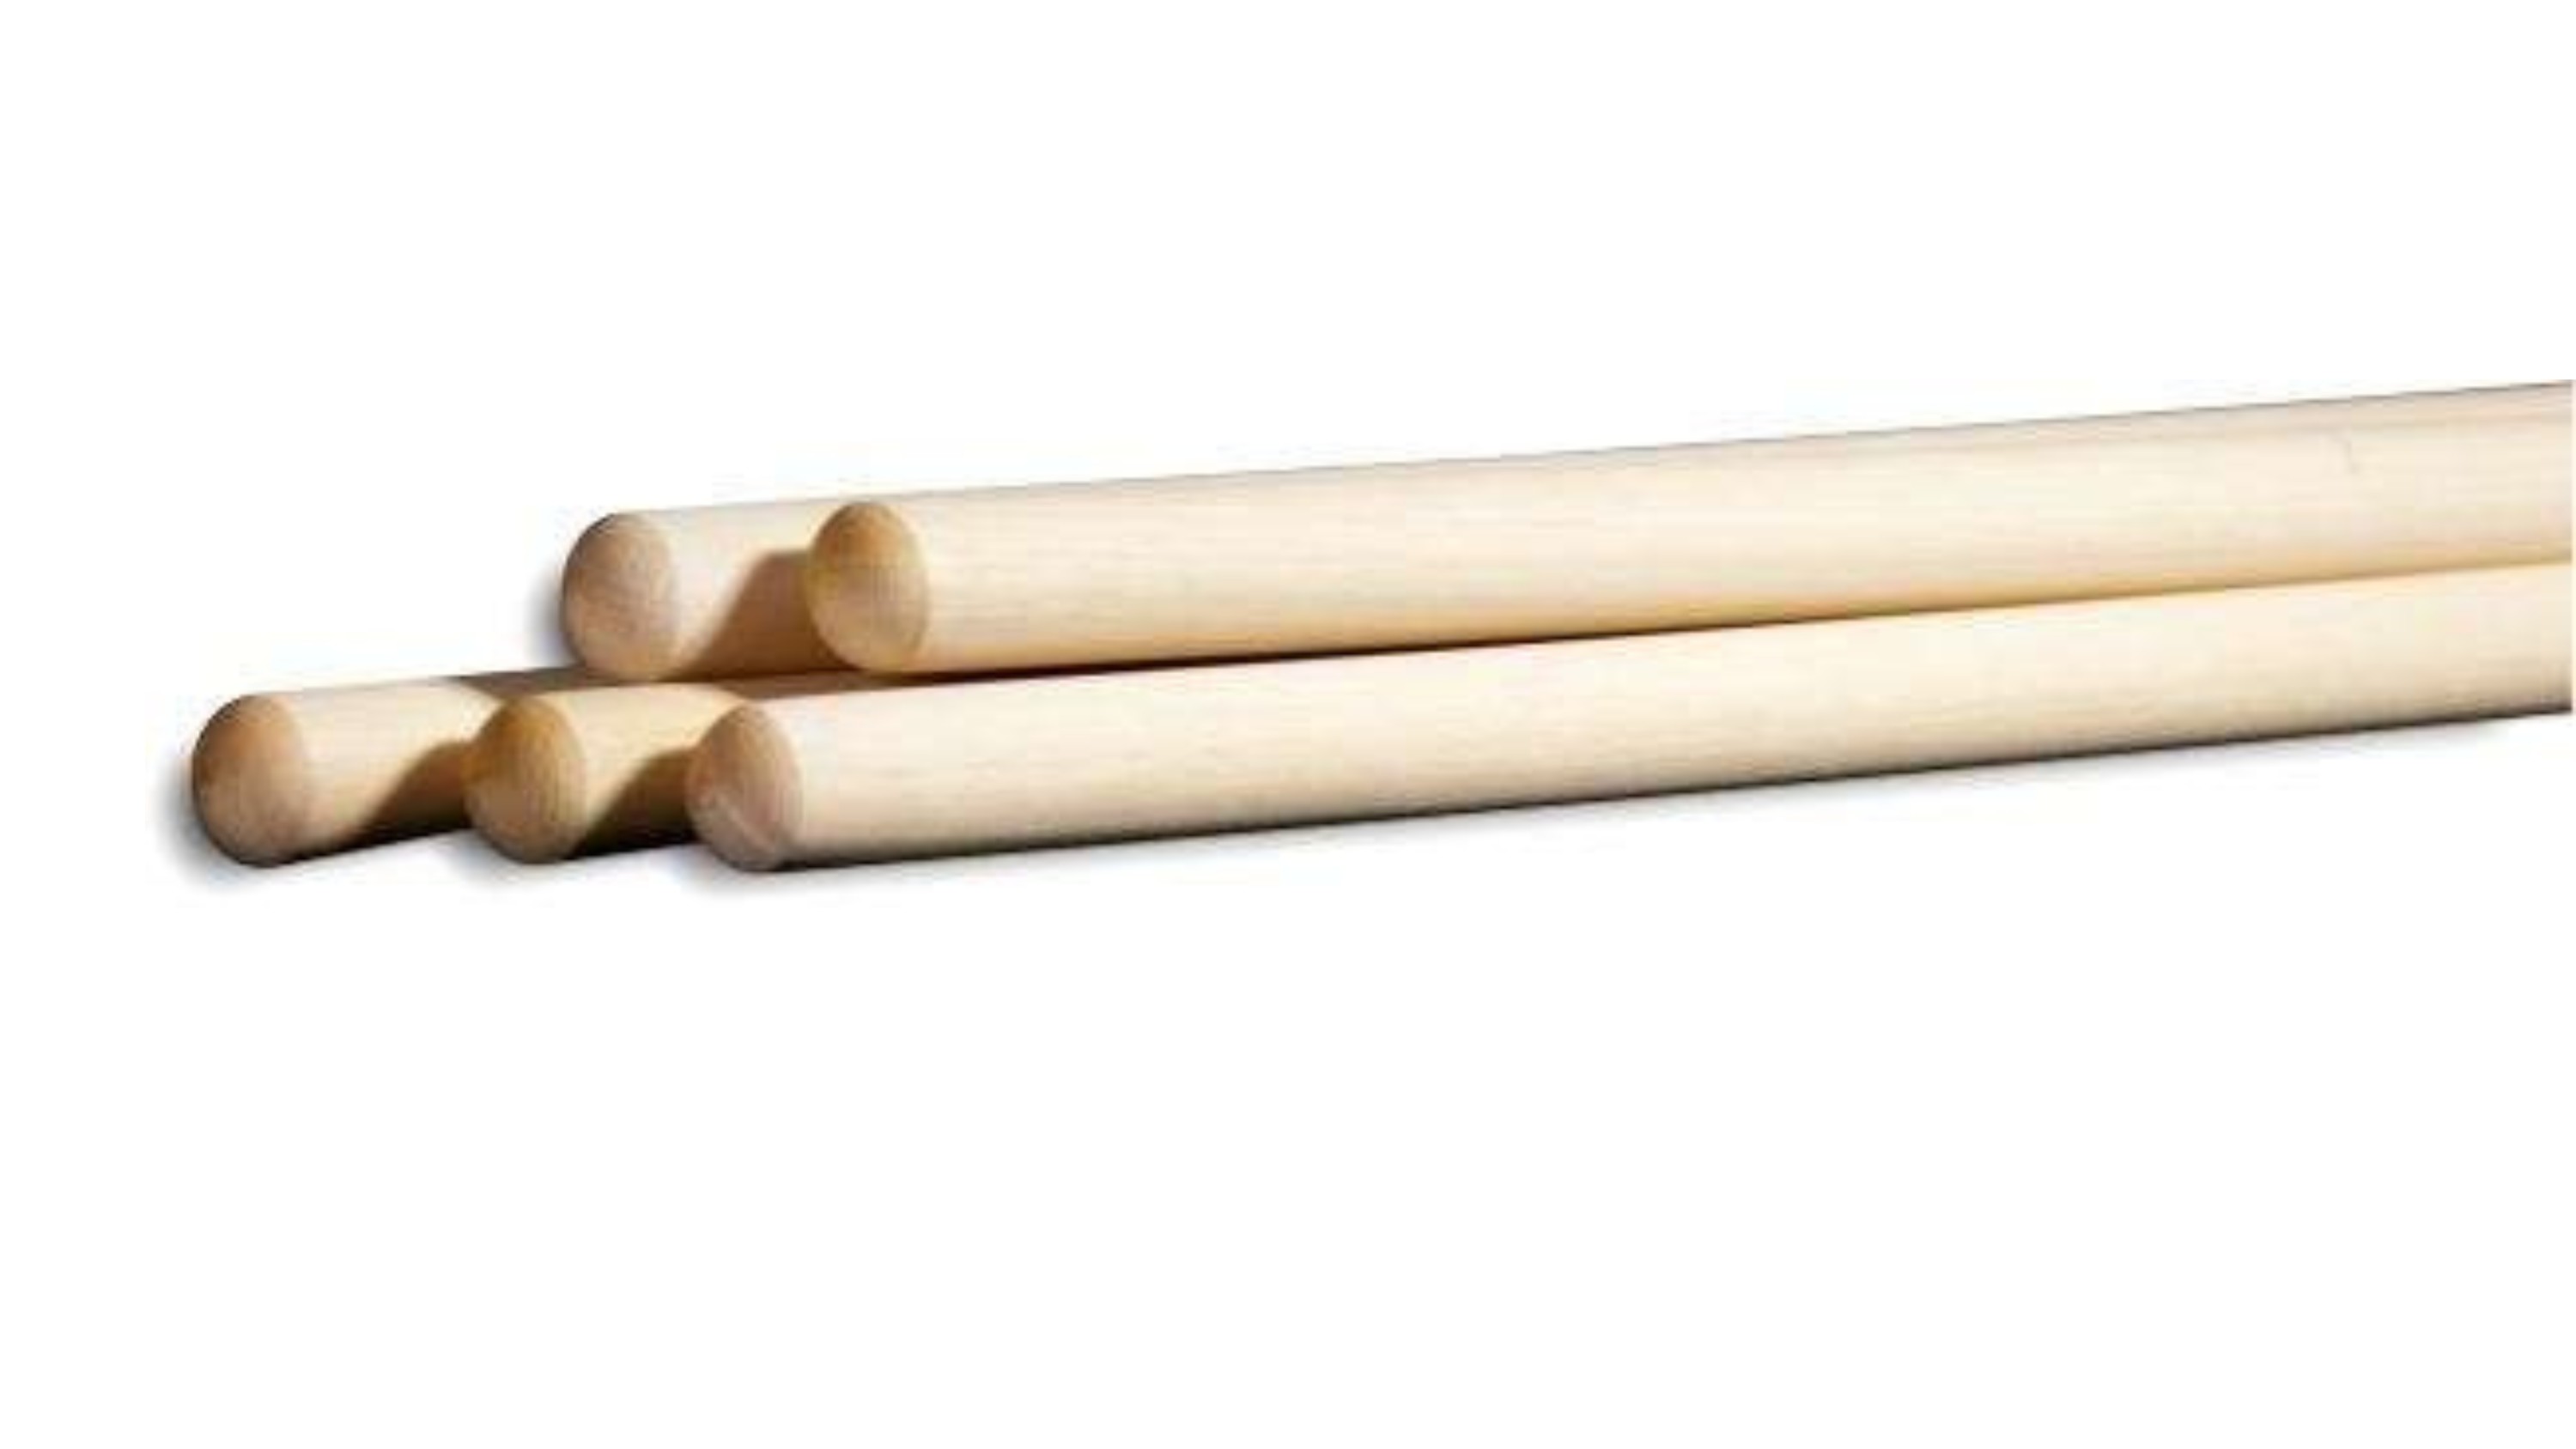 With this stick you reduce stiffness and increase the mobility of various joints.